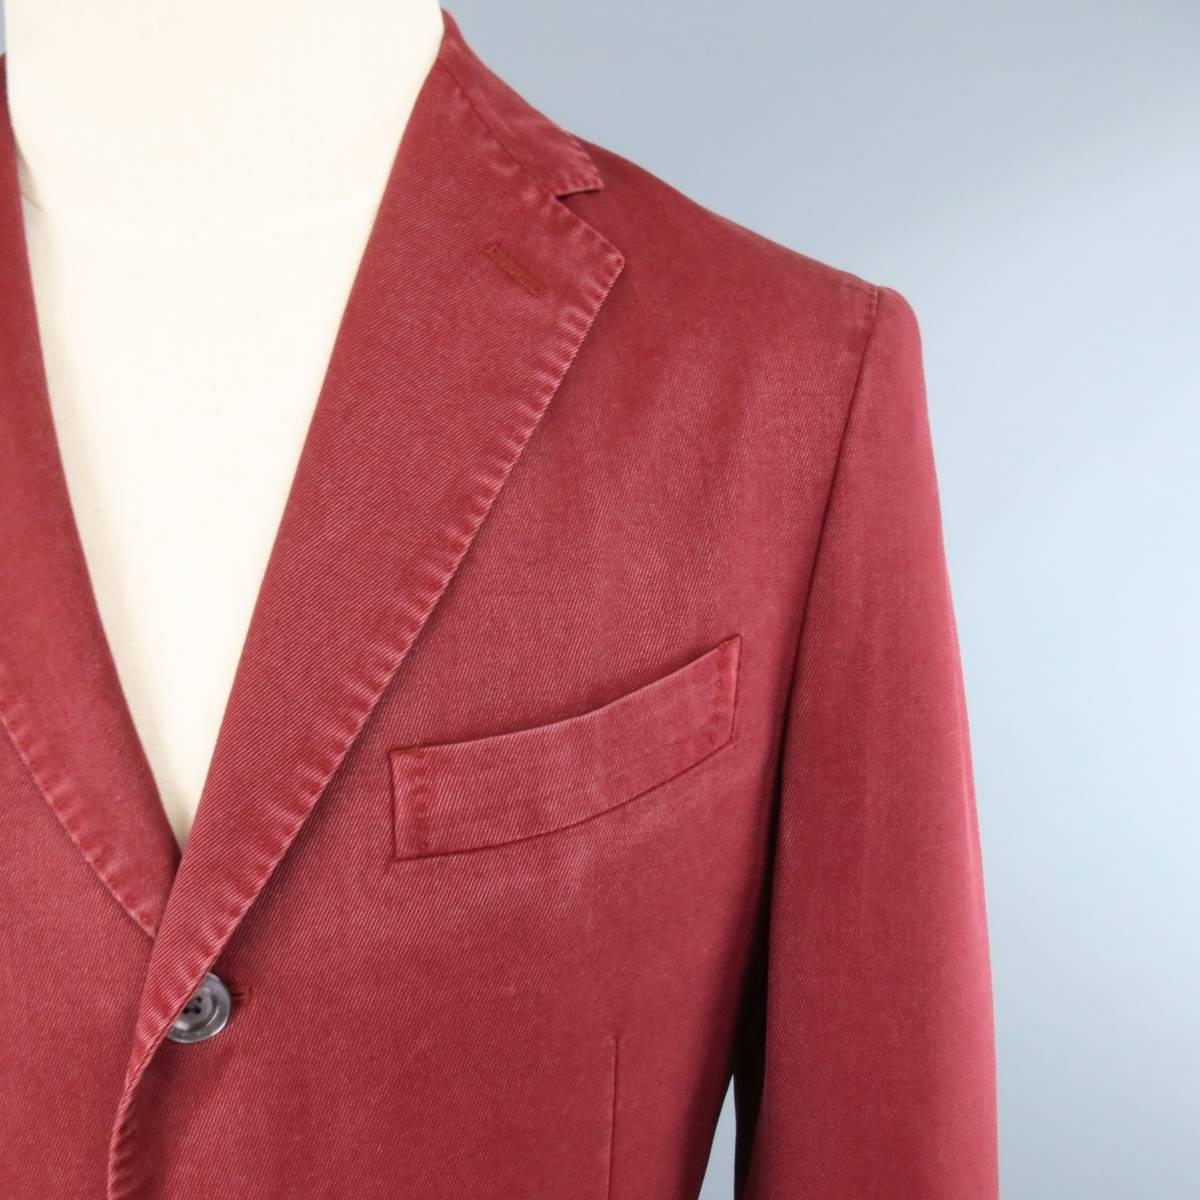 BOGLIOLI Sport Coat consists of wool material in a red color tone. Designed in a notch lapel collar and 3-button front. Detailed with a top pocket square, bottom patch pockets and 4-button cuffs. Single back vent and unconstructed lining. Made in